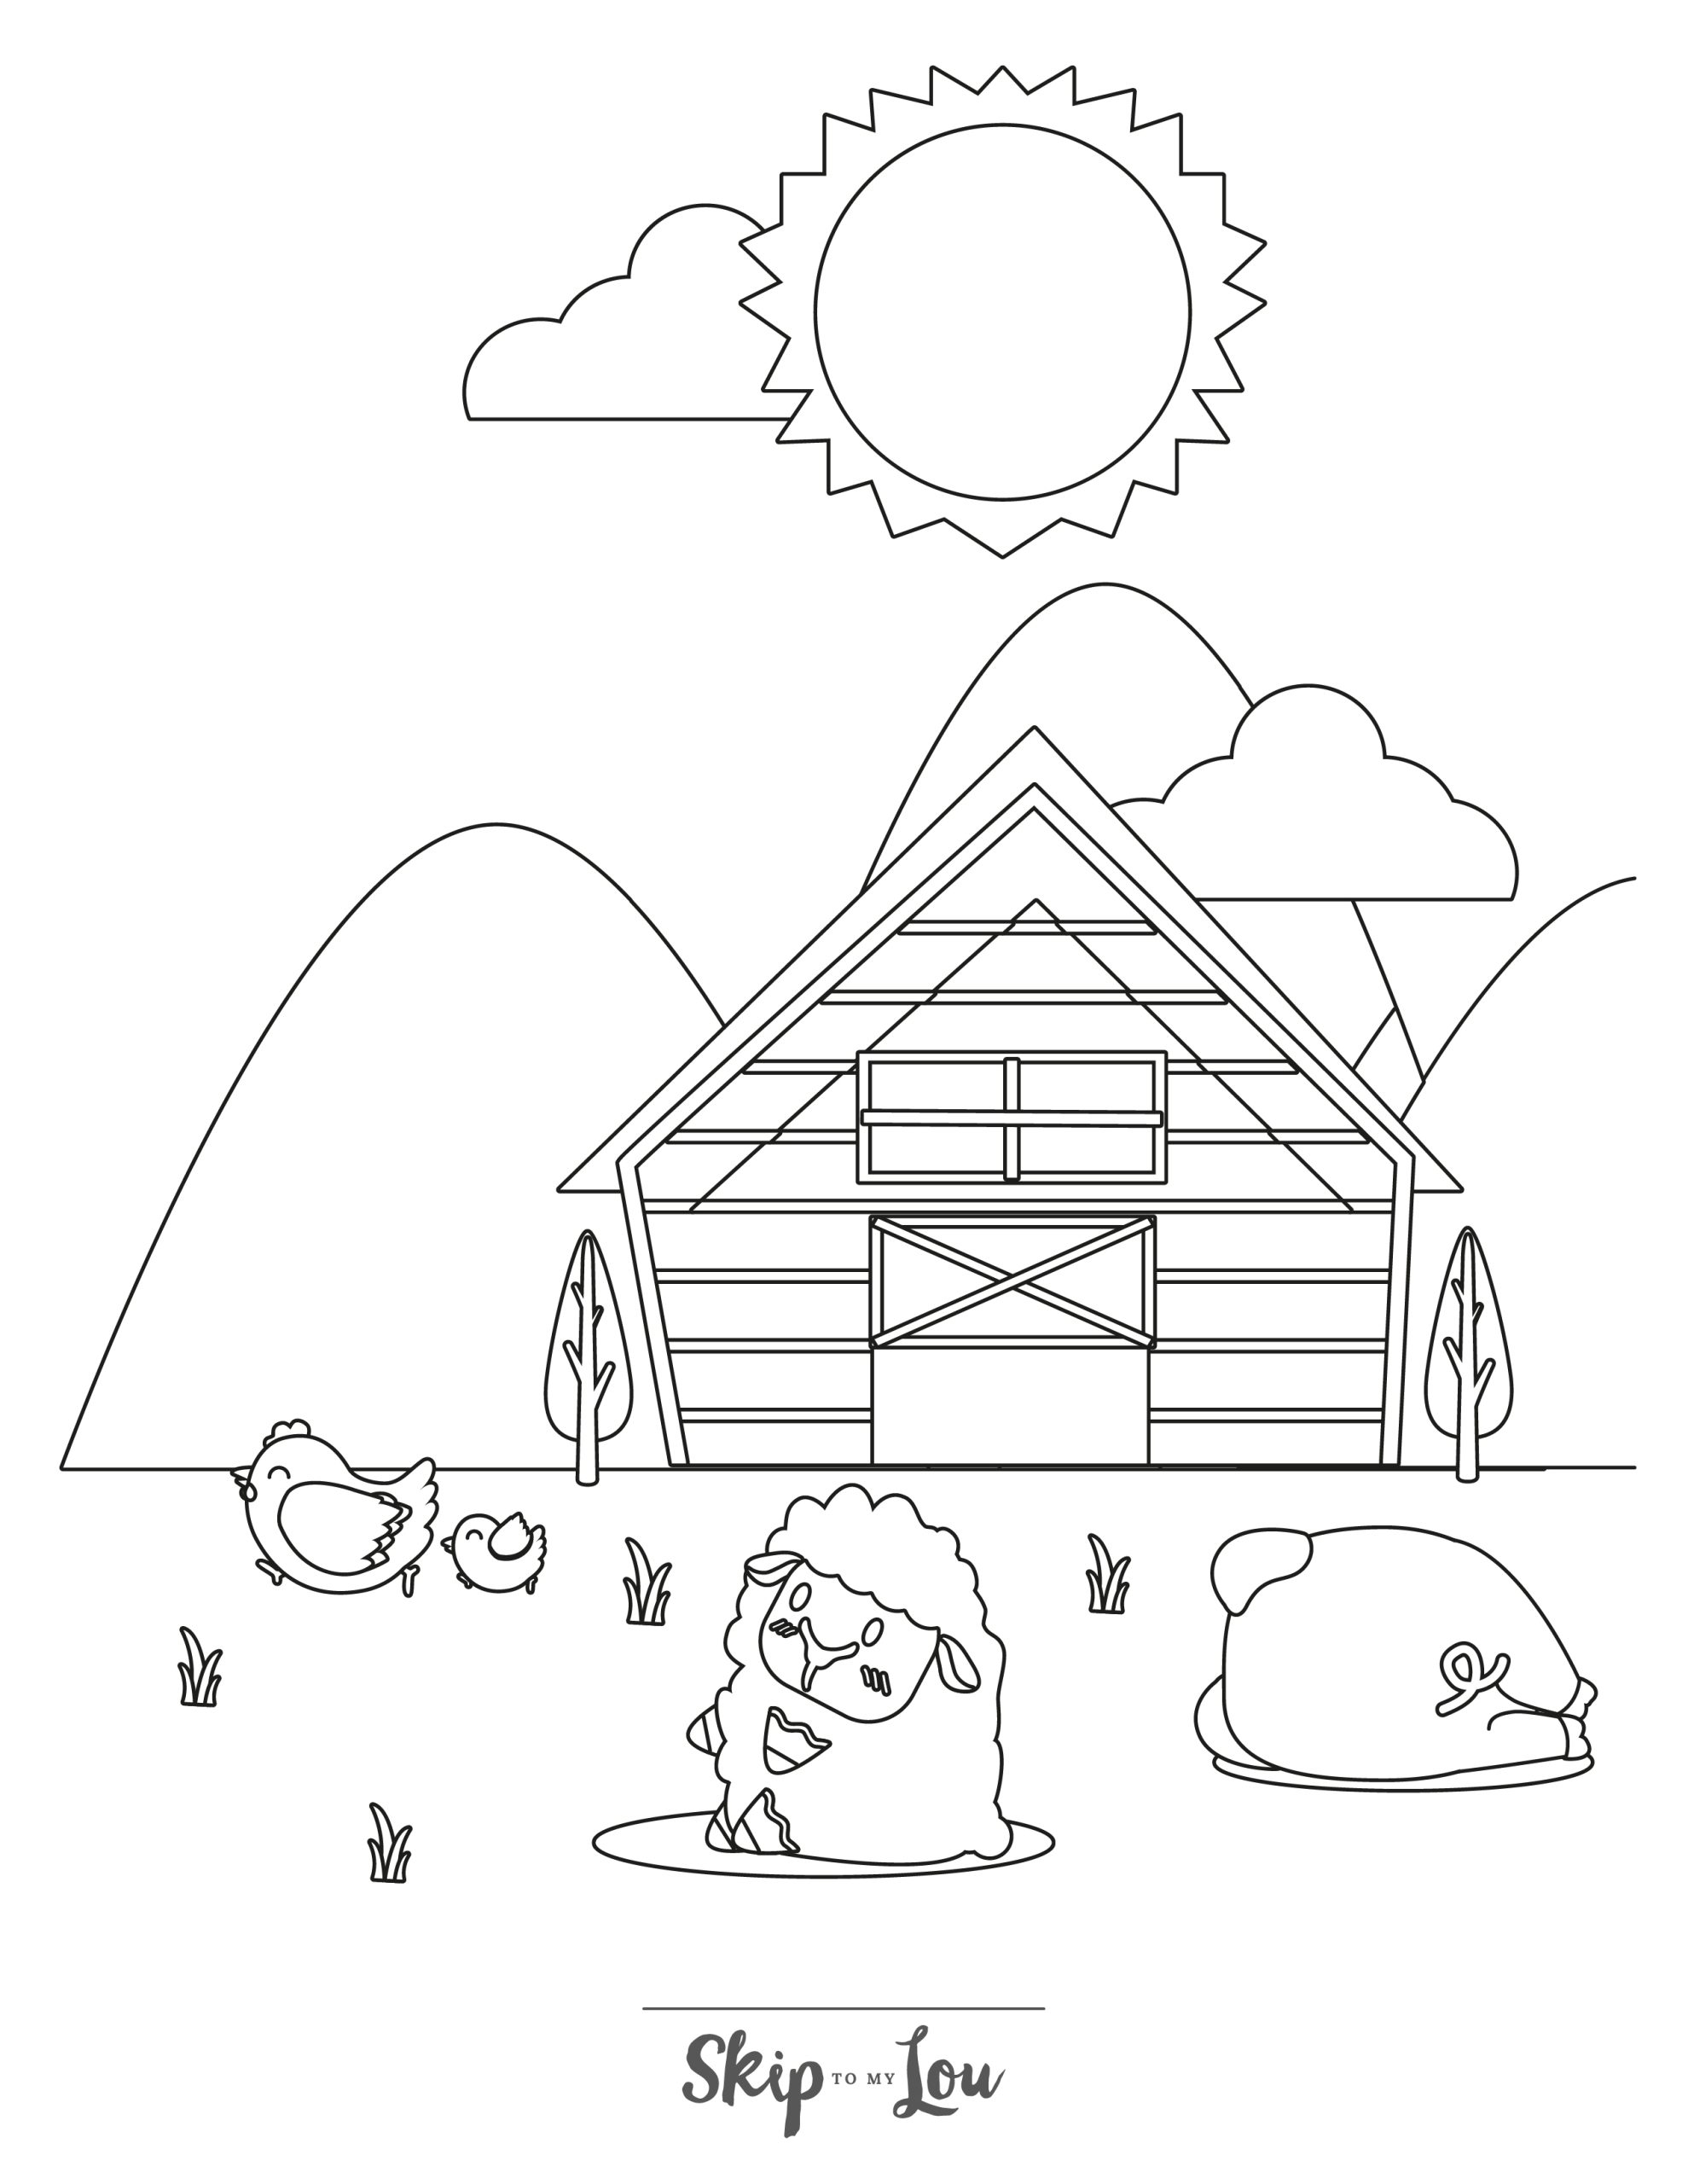 Farm Coloring Page 2 - A line drawing of barn animals with a barn and hills in the background